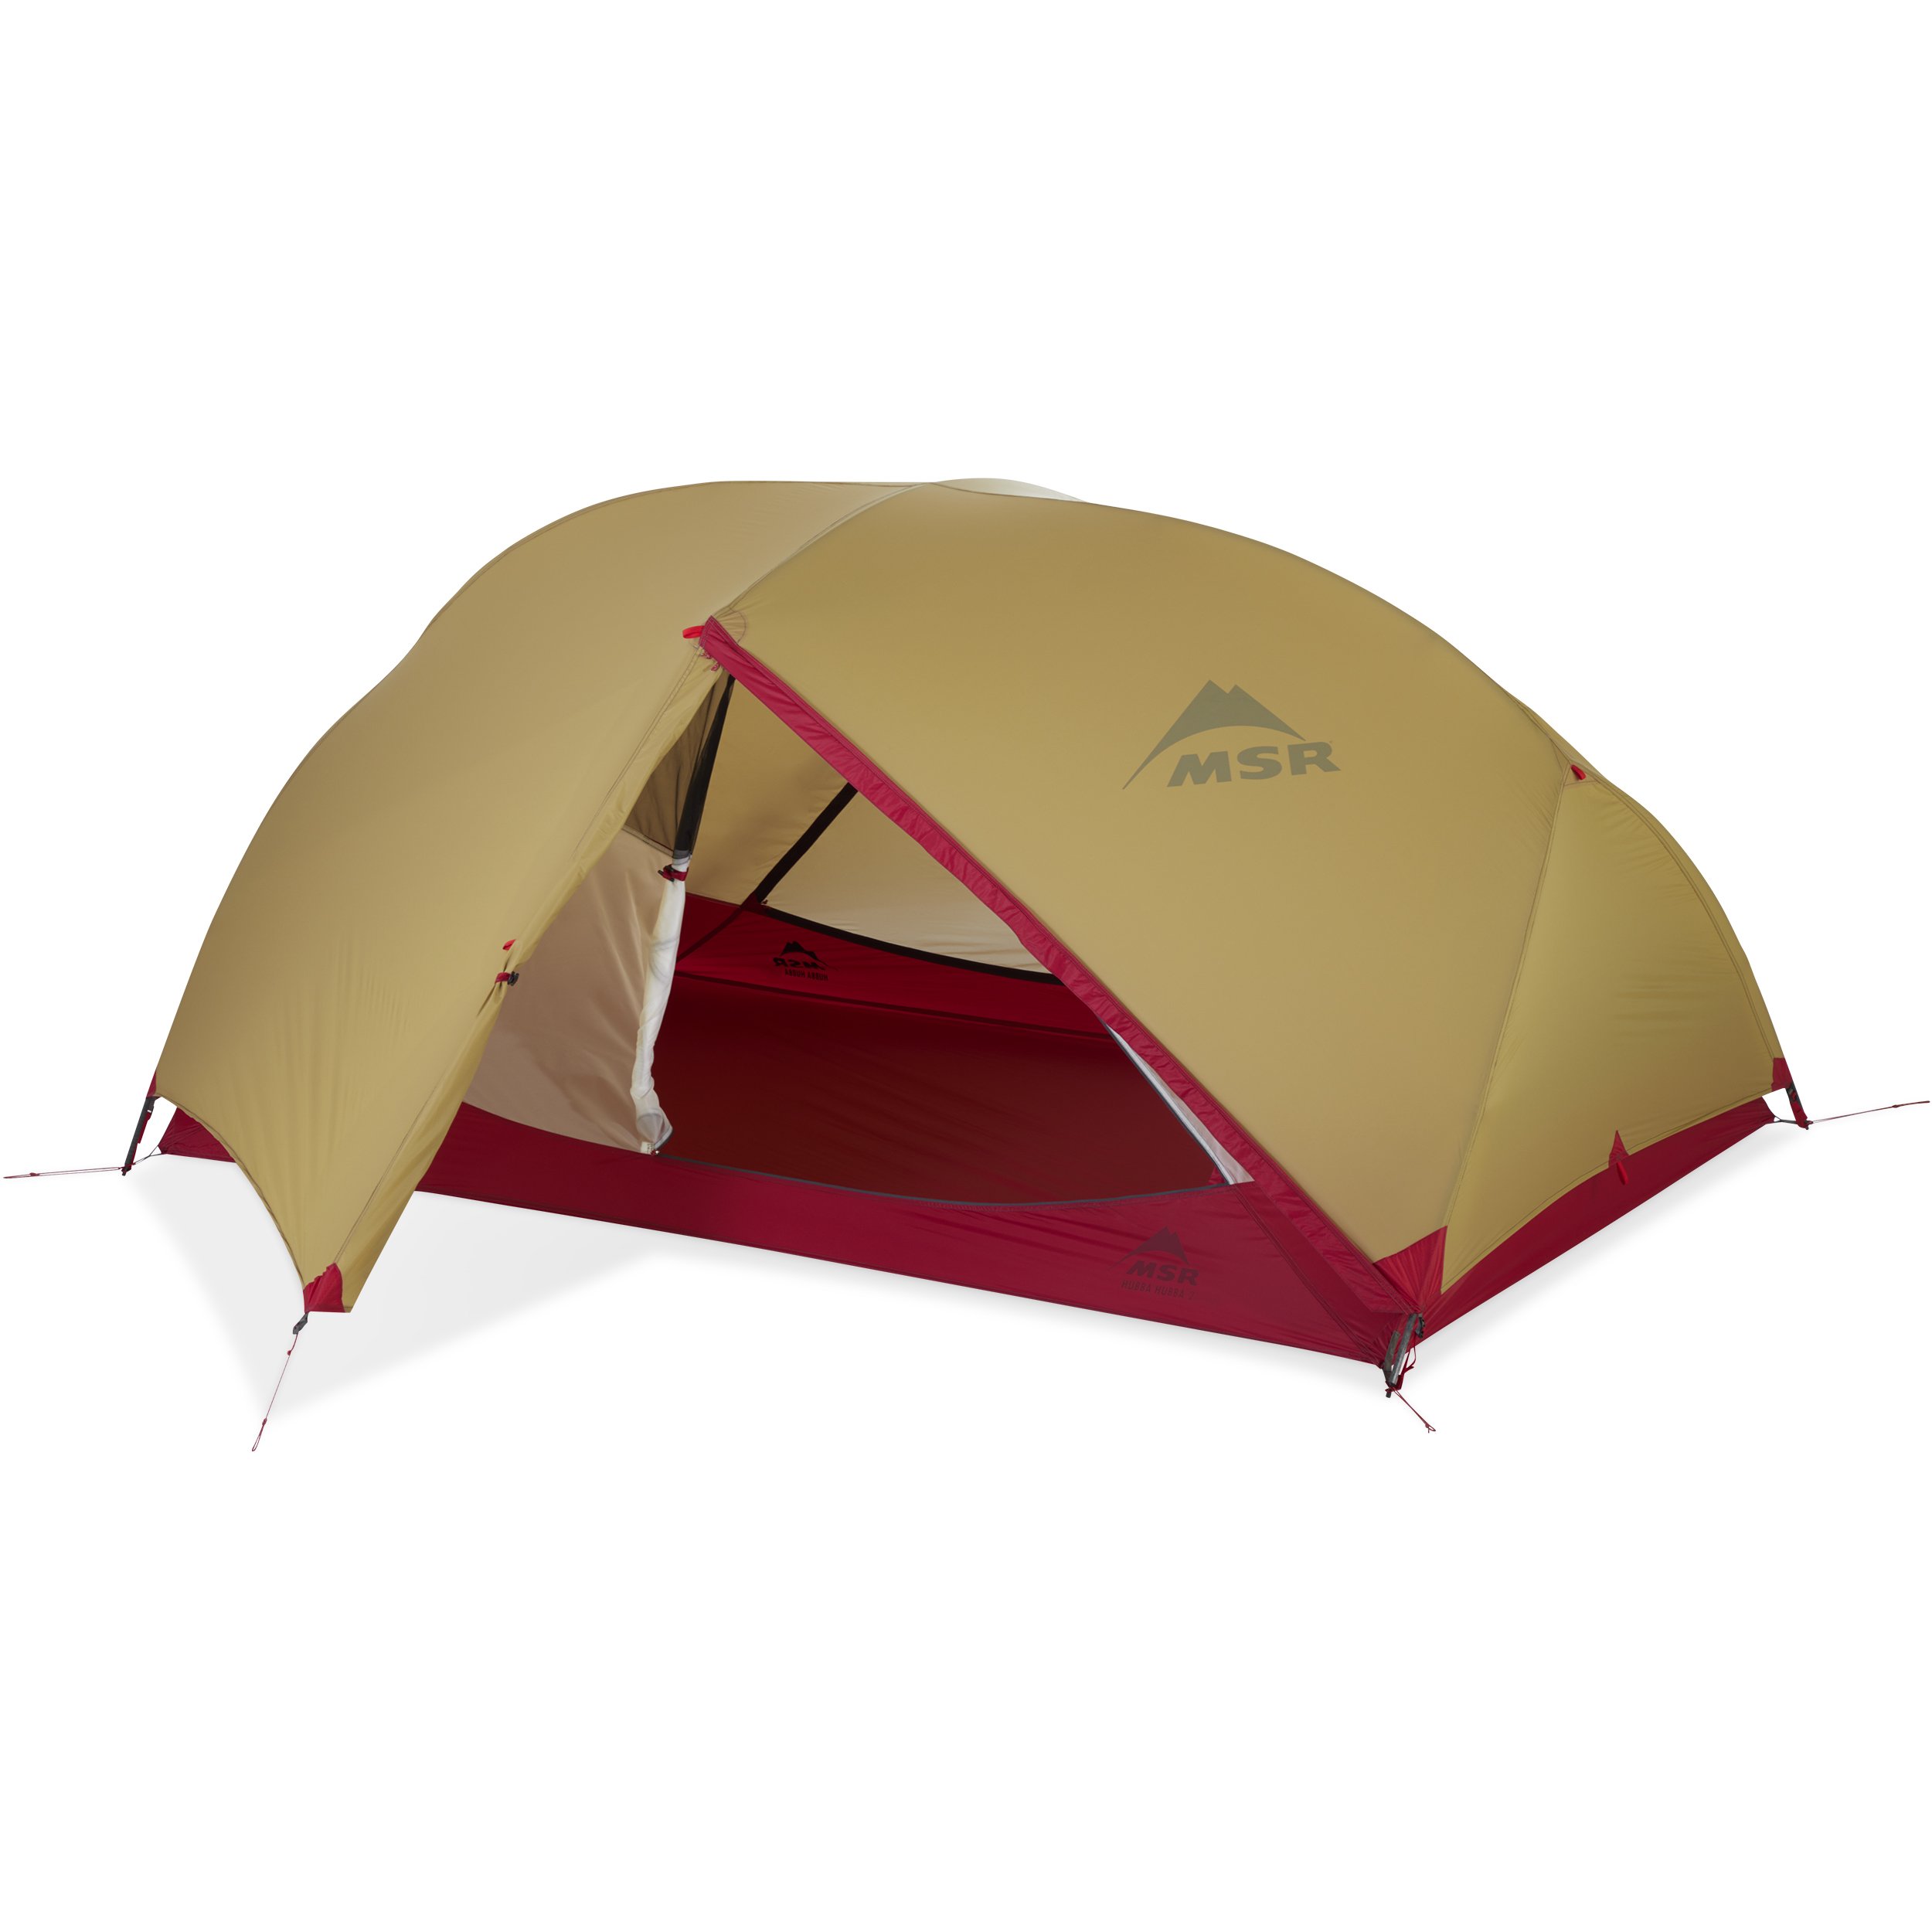 2-Person　Legendary　Backpacking　Tent　MSR®　Hubba　Hubba™